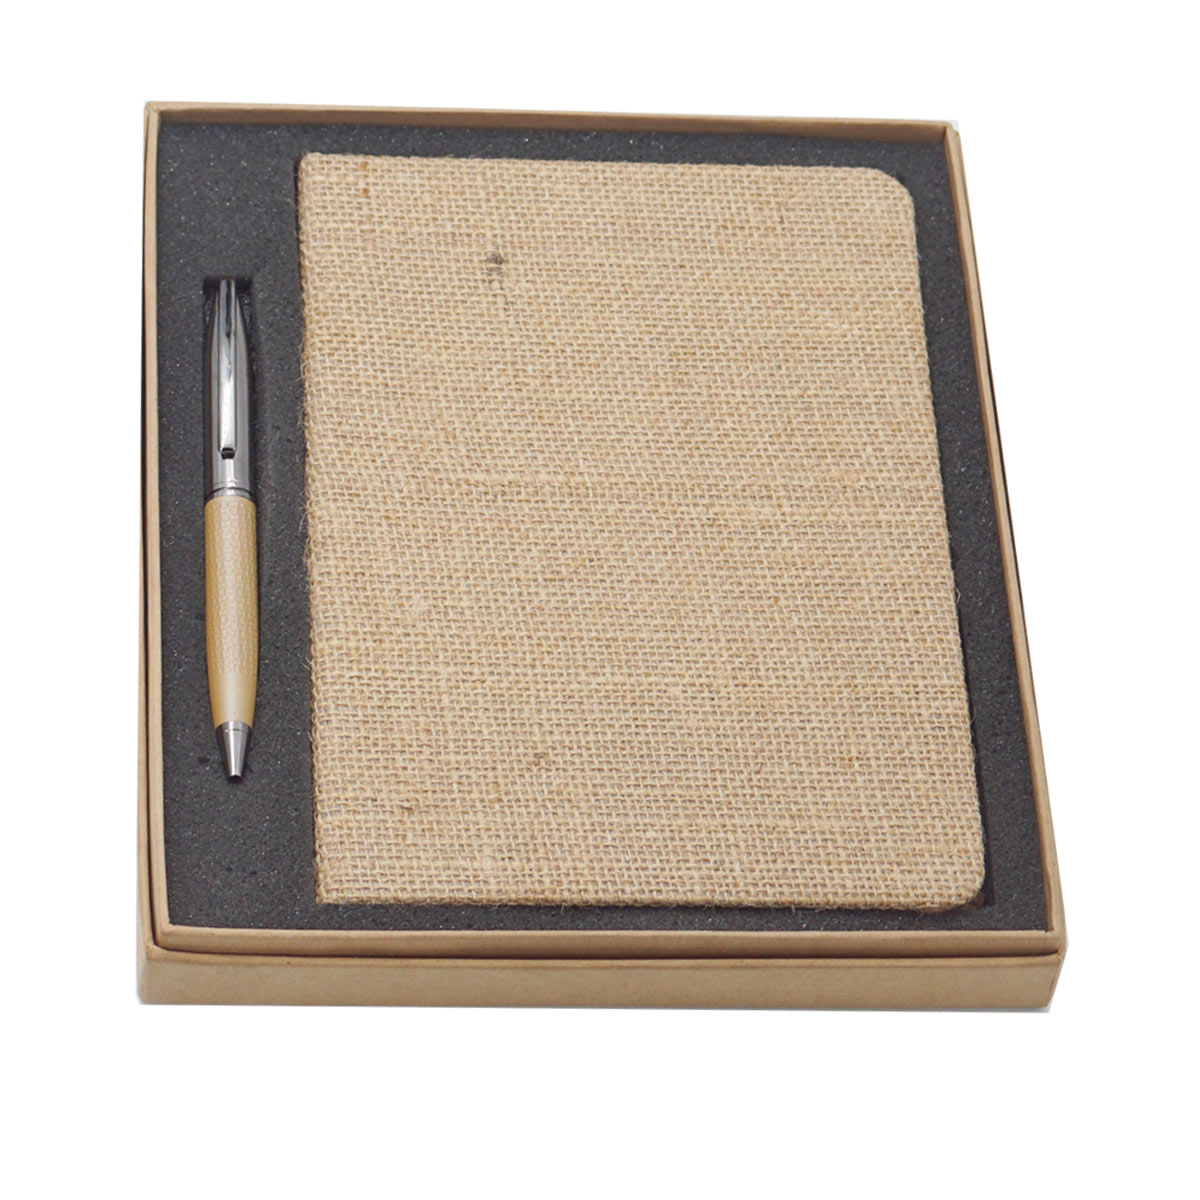 penhouse.in Jute Material Designed A5 Dairy  With Jute Designed Body And Silver Cap Twist Type Ball Pen 2 in 1 Set SKU 23630